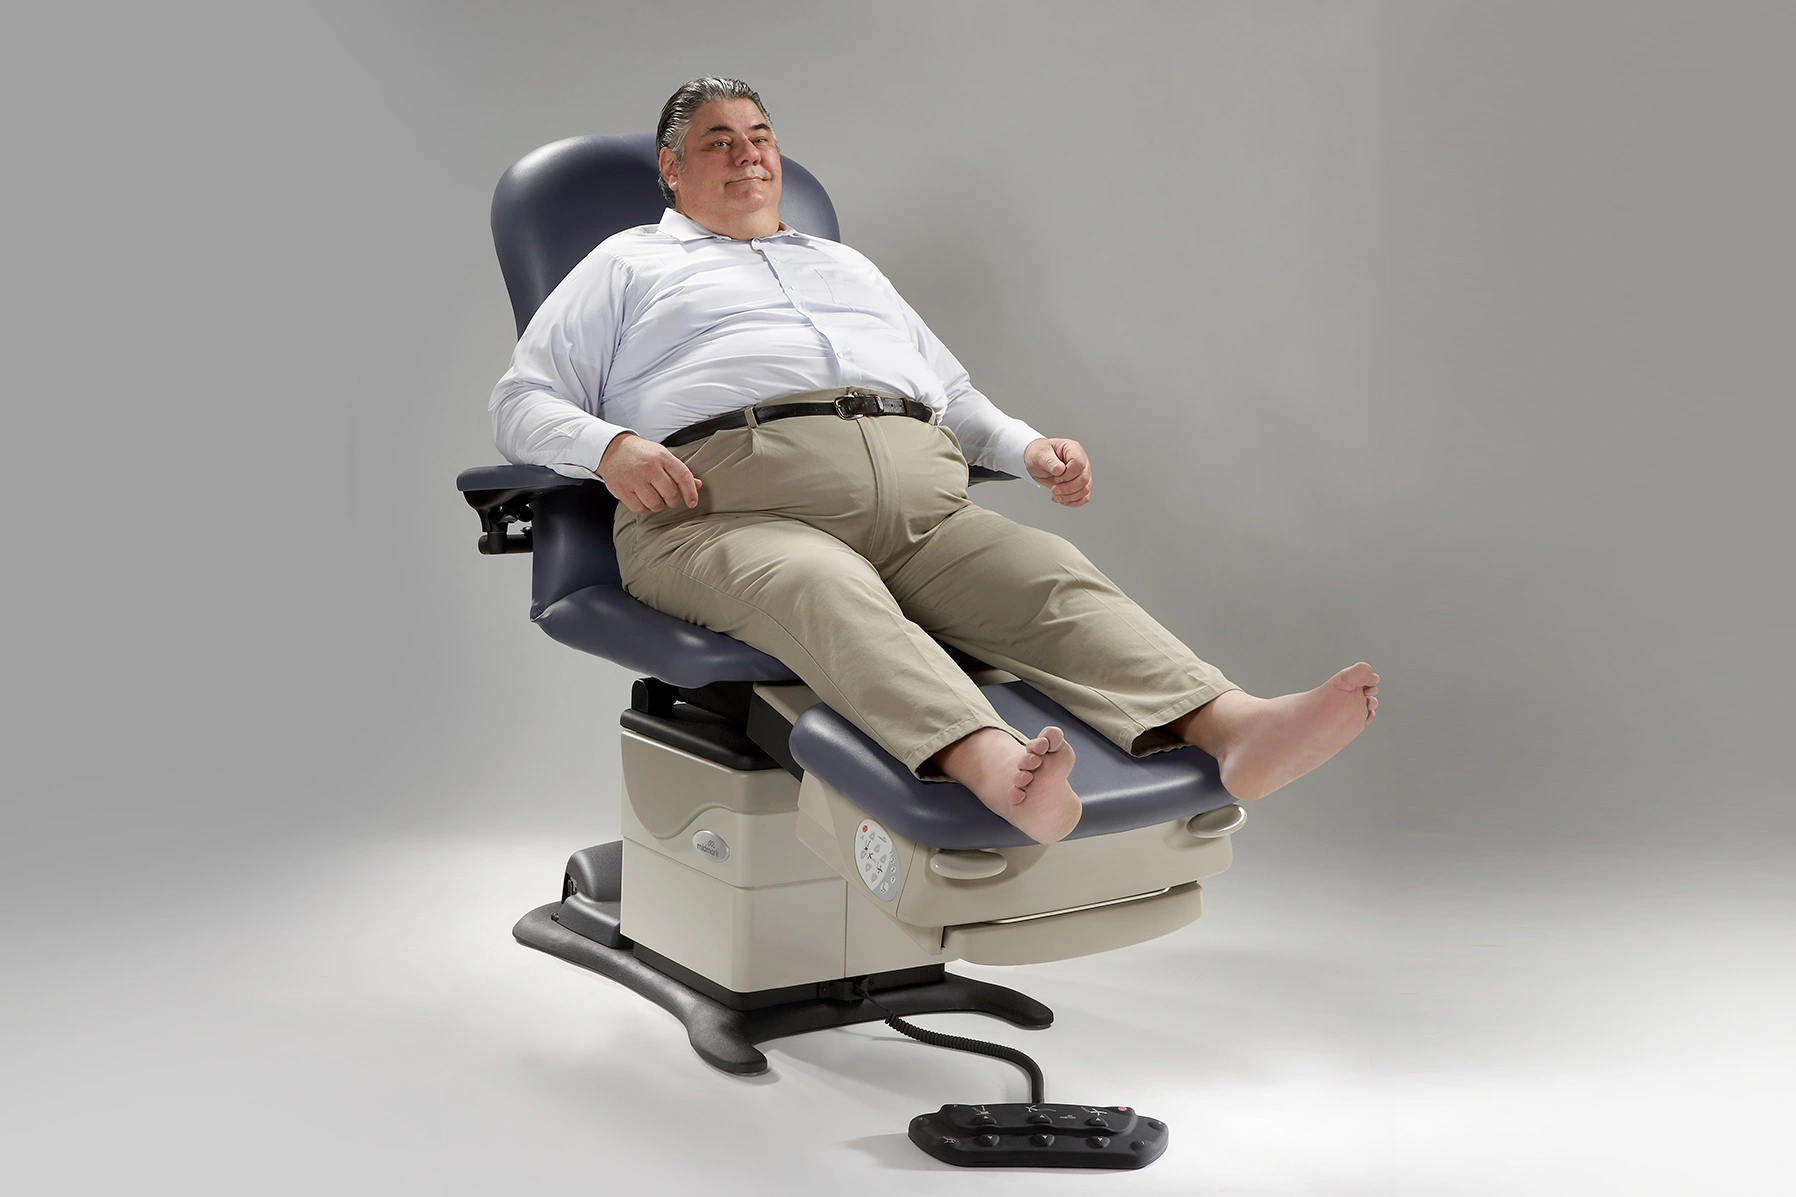 Electric procedure chair, Podiatry treatment chair